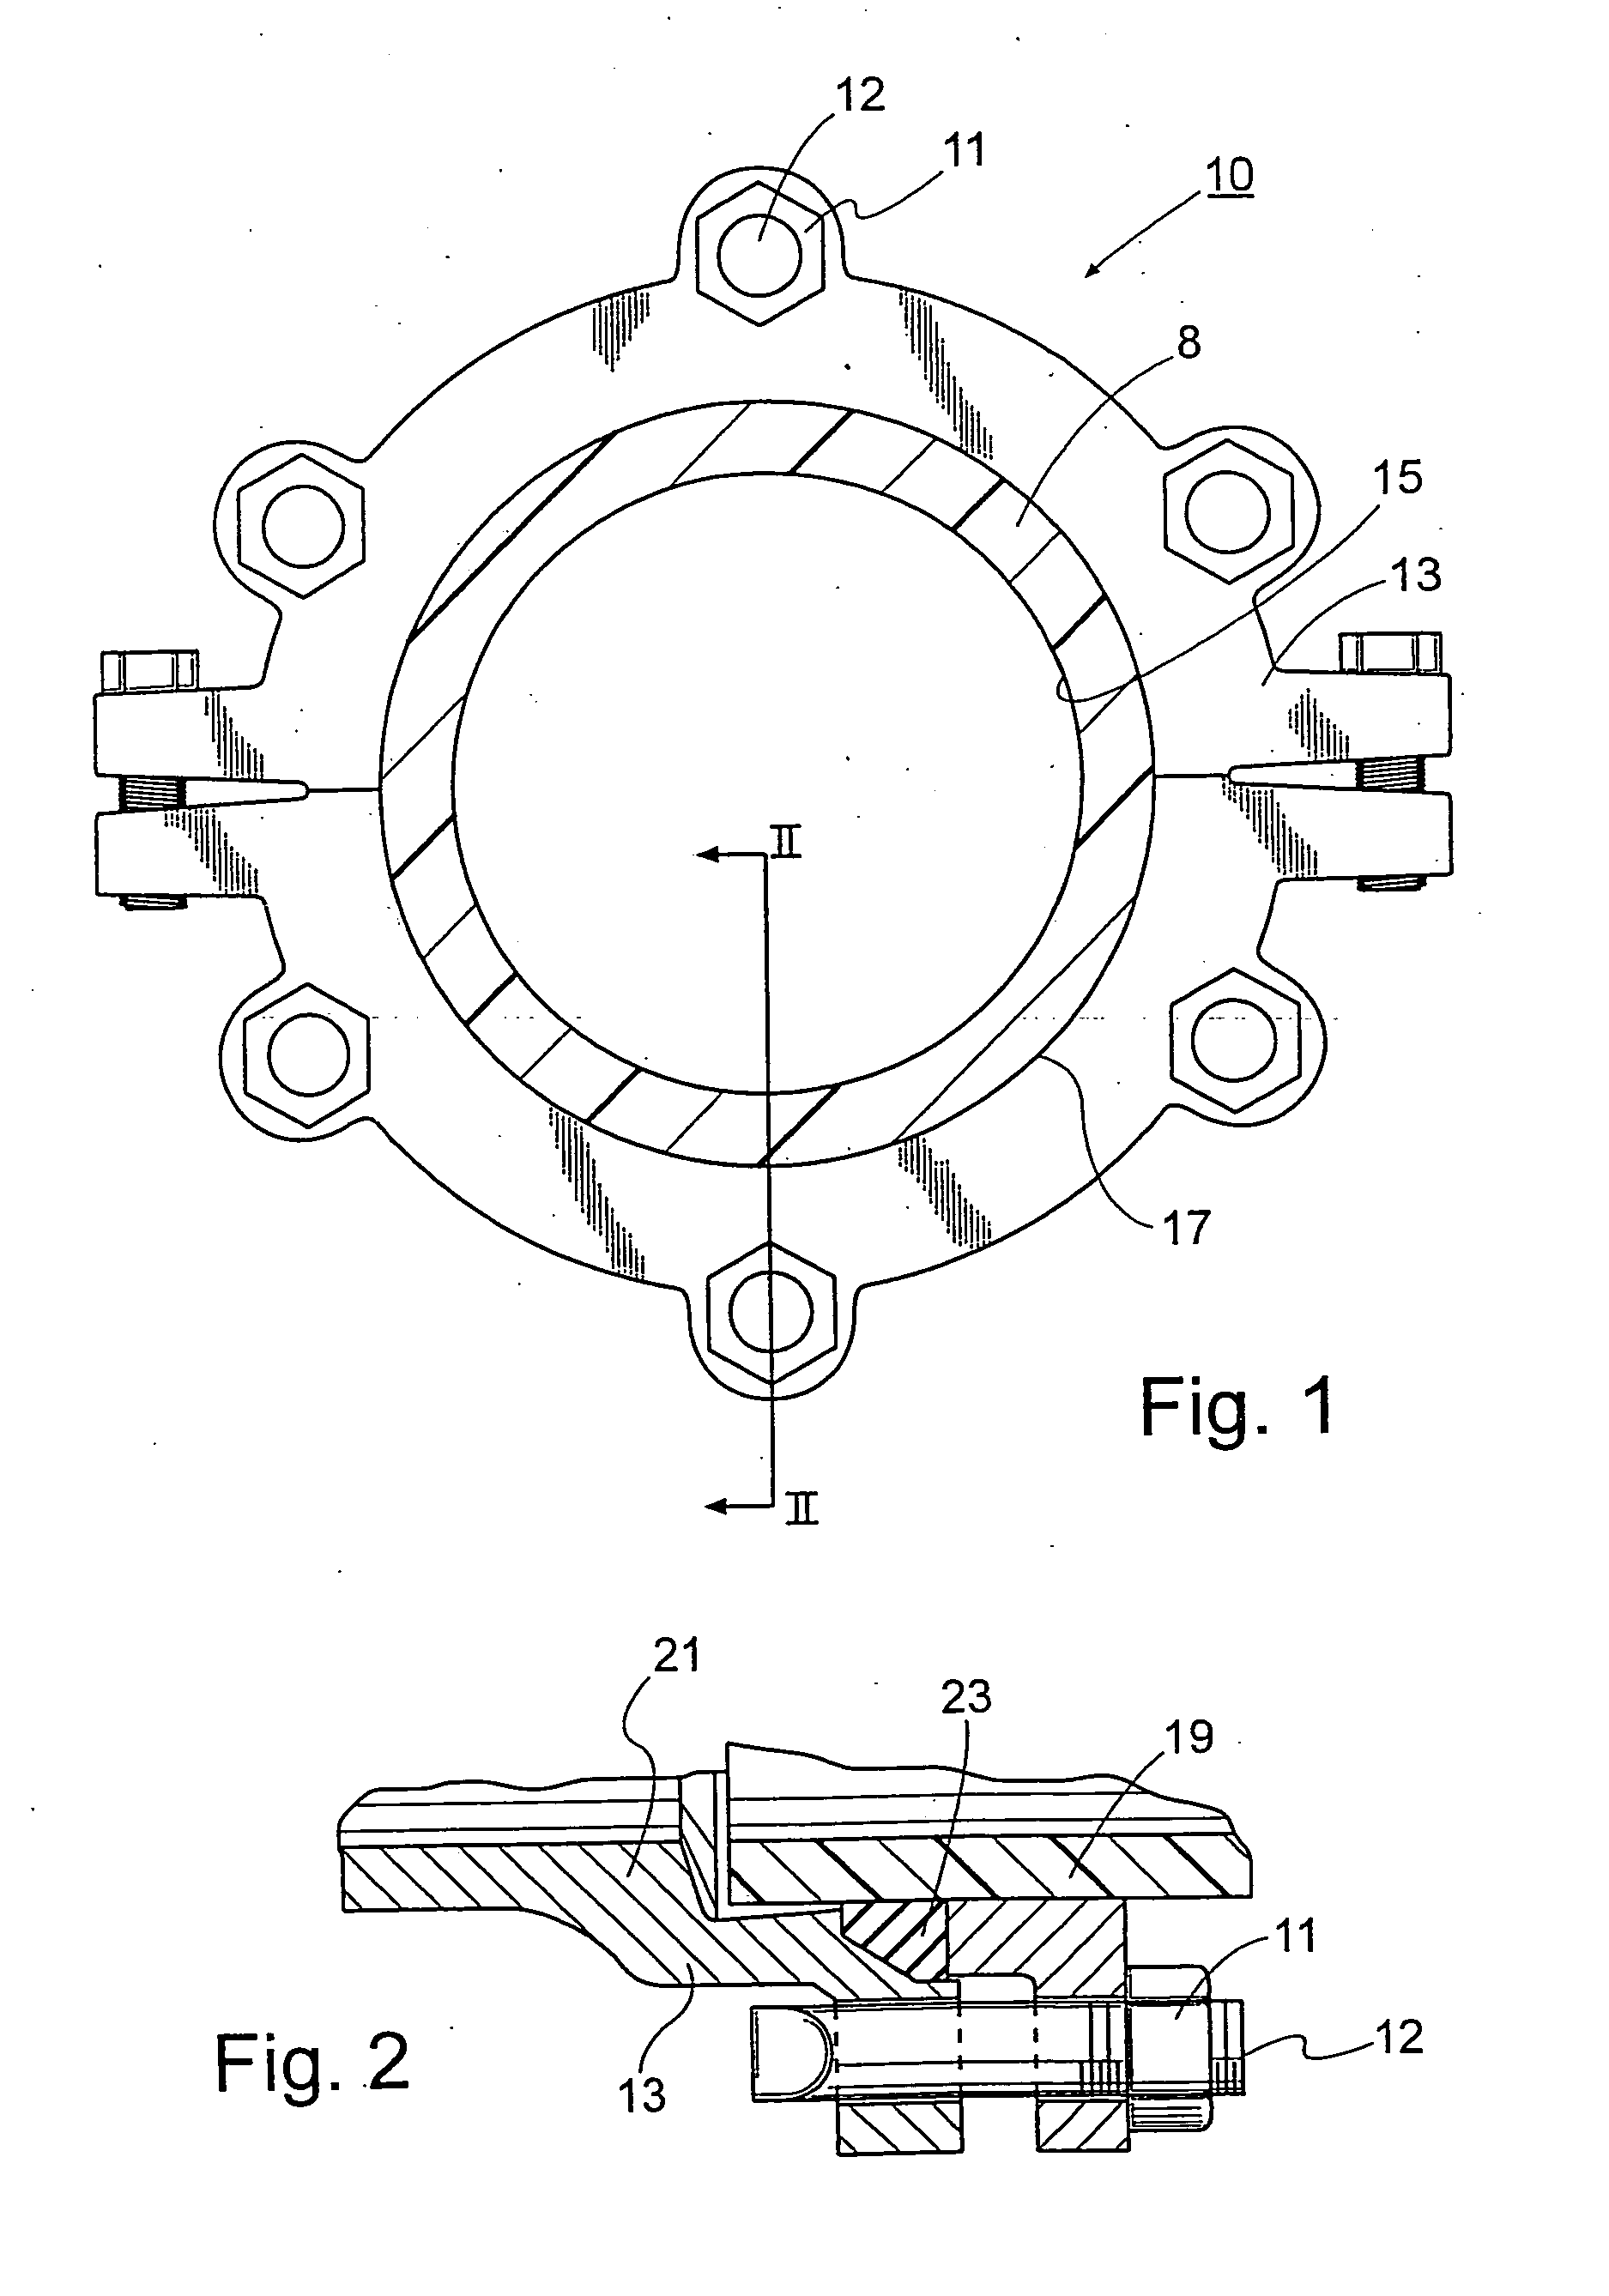 Method of applying a phenolic resin corrosion protective coating to a component used in a fluid conveyance system